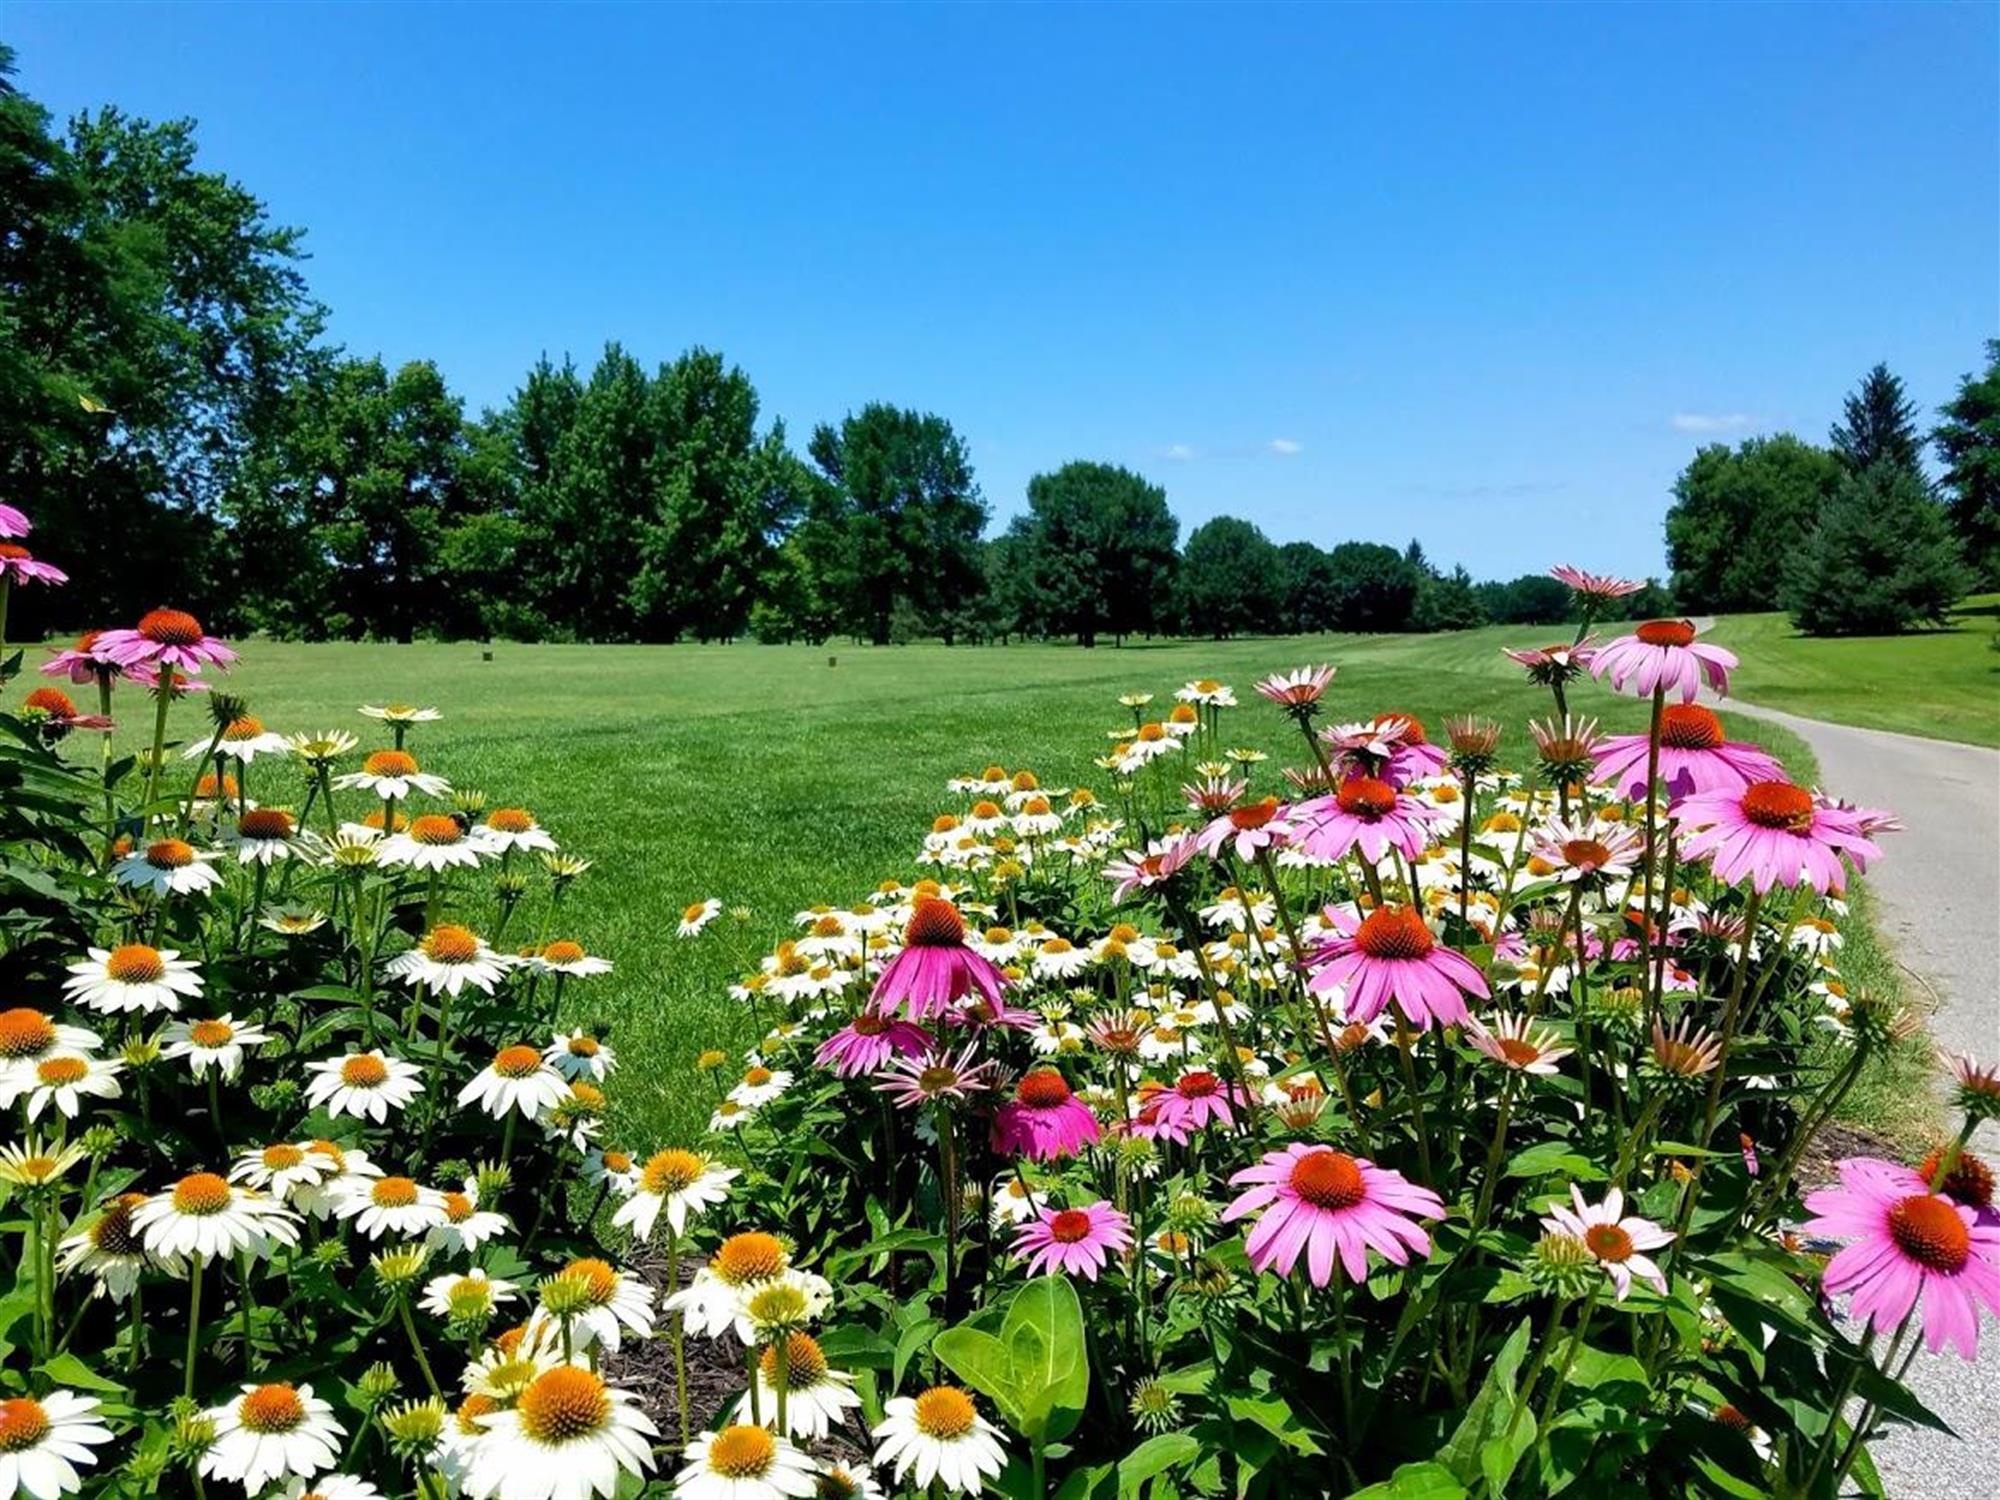 Native flowers and prairie plants throughout the course!